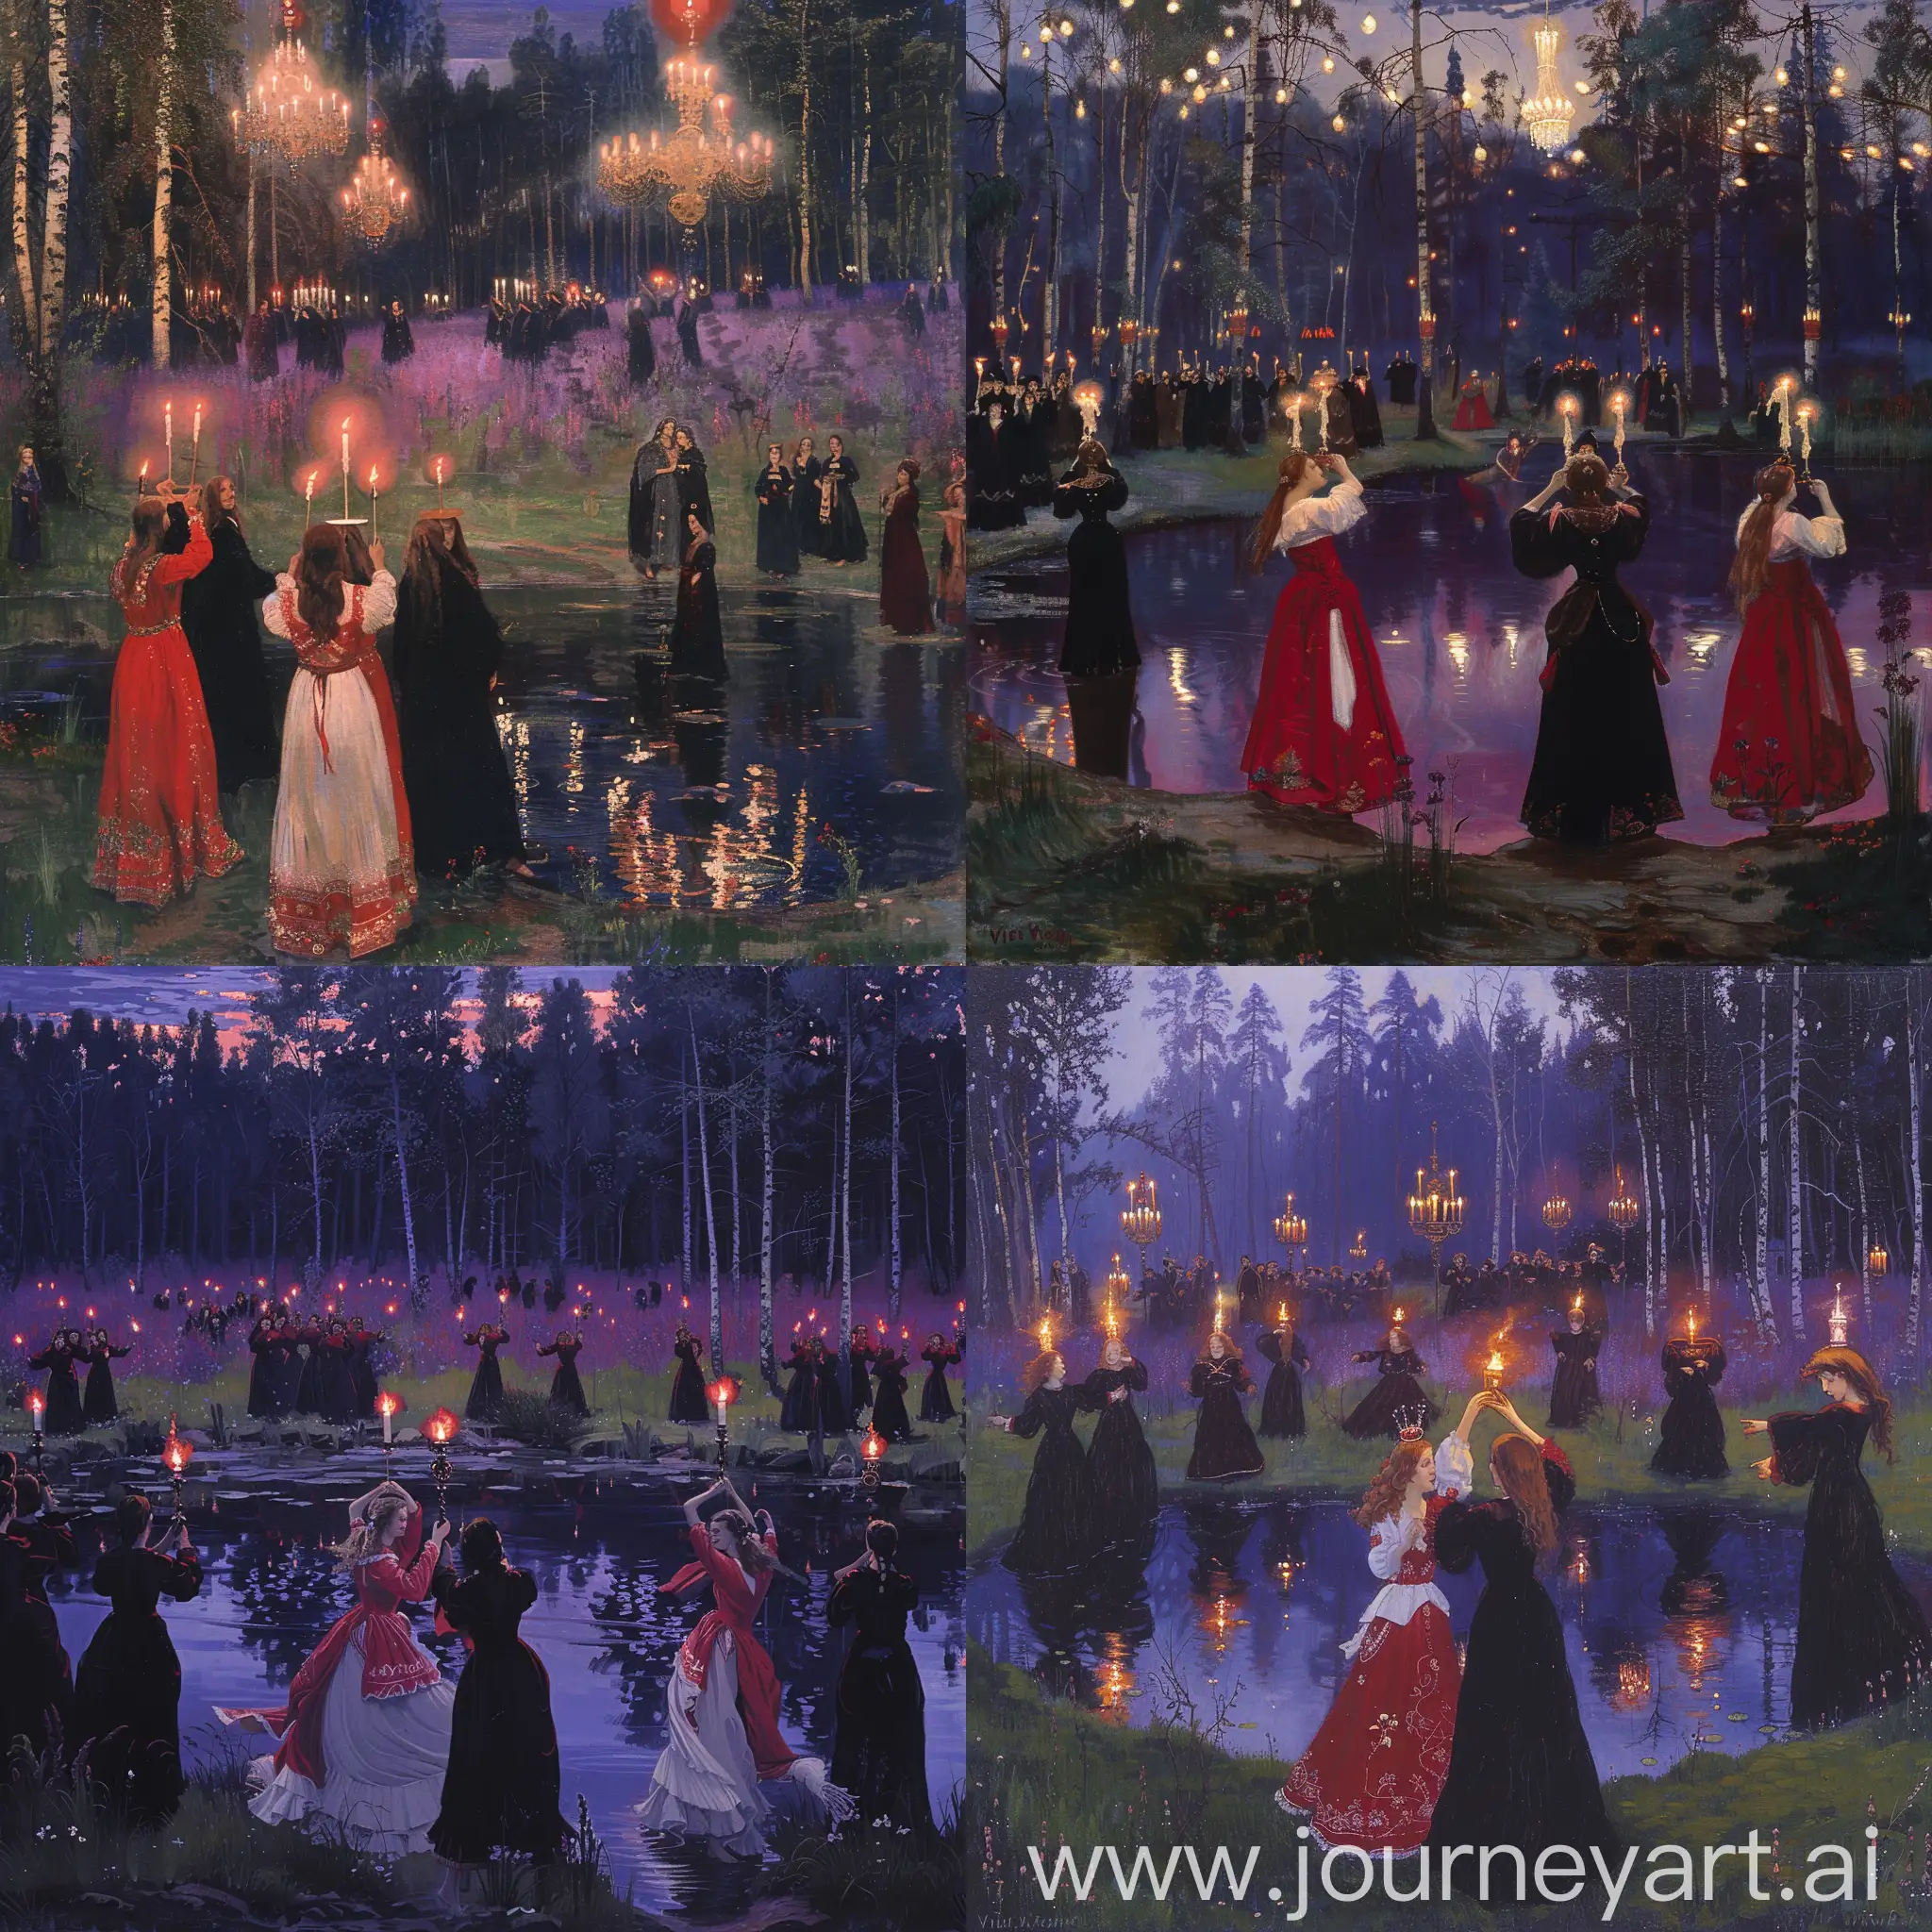 Viktor Vasnetsov, soft lighting, beautiful girls near the pond in red and white with candles on their heads against the background of purple meadows and dark woods at night, many people dance around them in black robes, an atmosphere of sadness and romance, large strokes, high detail